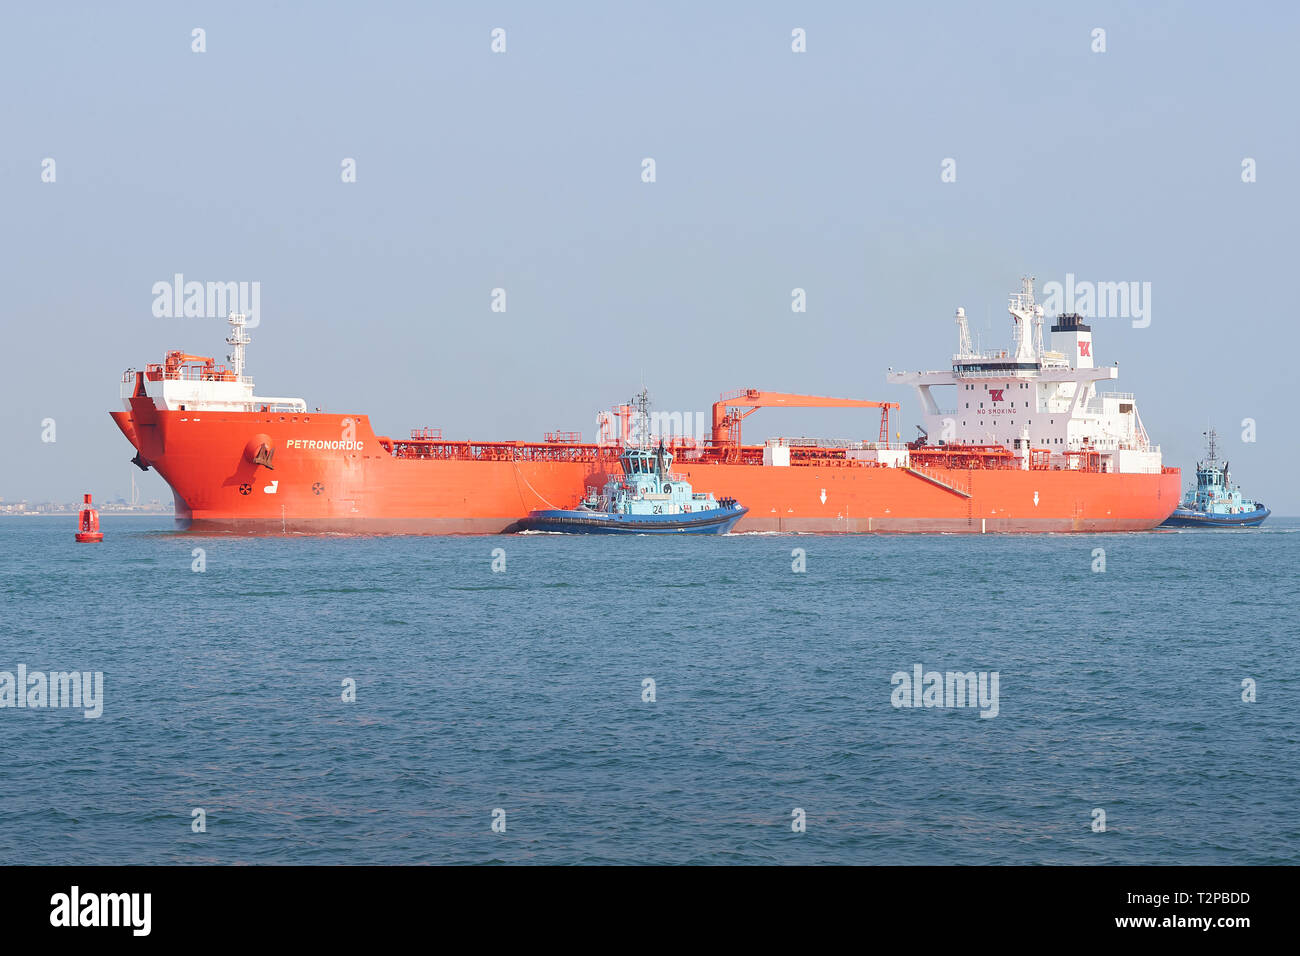 The Crude Oil Tanker (Shuttle Tanker), PETRONORDIC, Escorted By 2 Tugs, Enters The Port Of Southampton, UK. 28 March 2019 Stock Photo